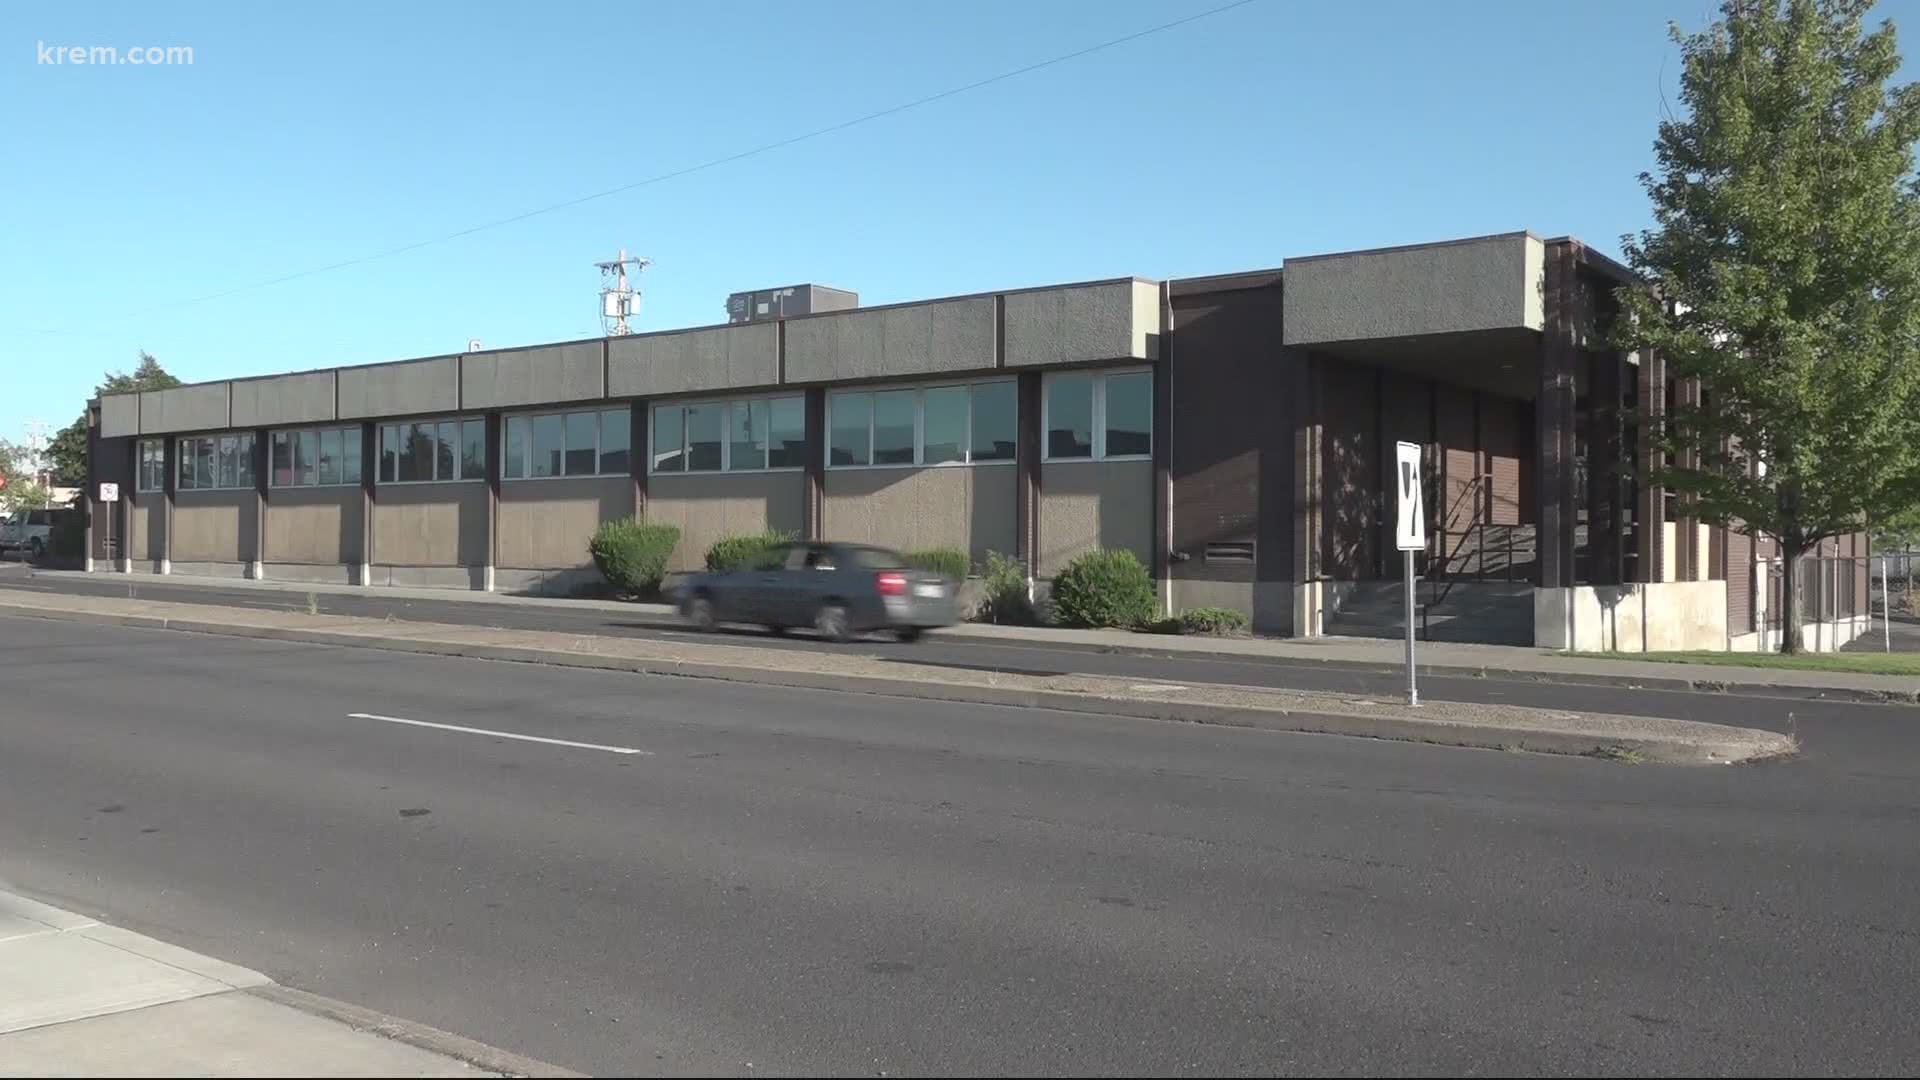 What You Need To Know About Spokane S New Homeless Shelter Khou Com